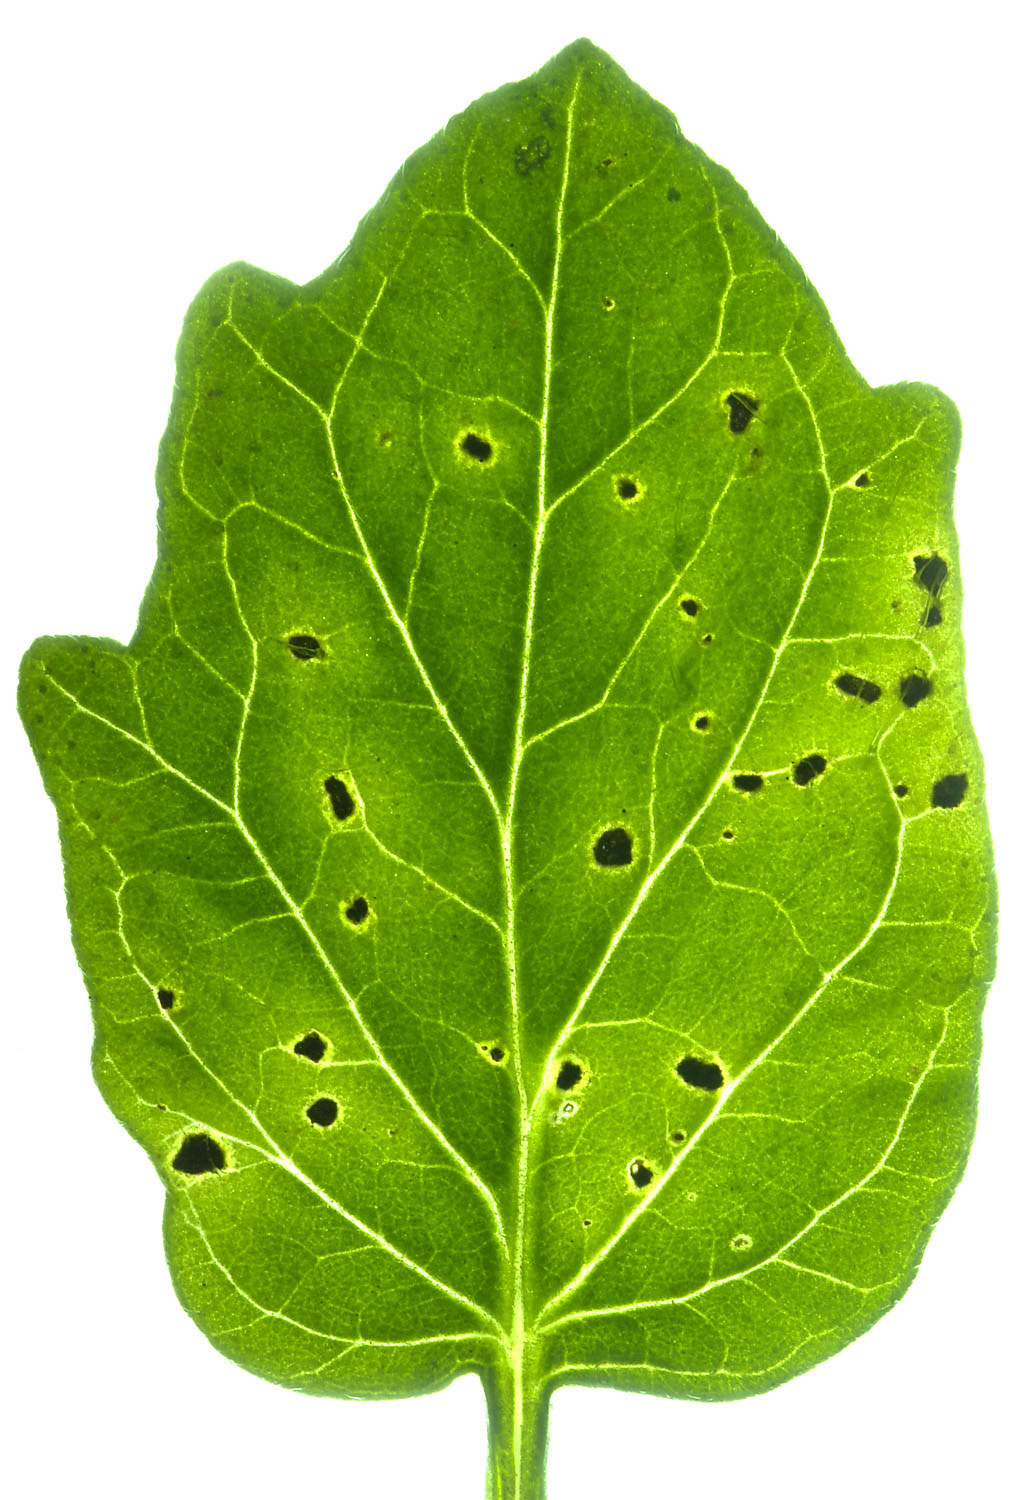 an infected tomato plant leaf